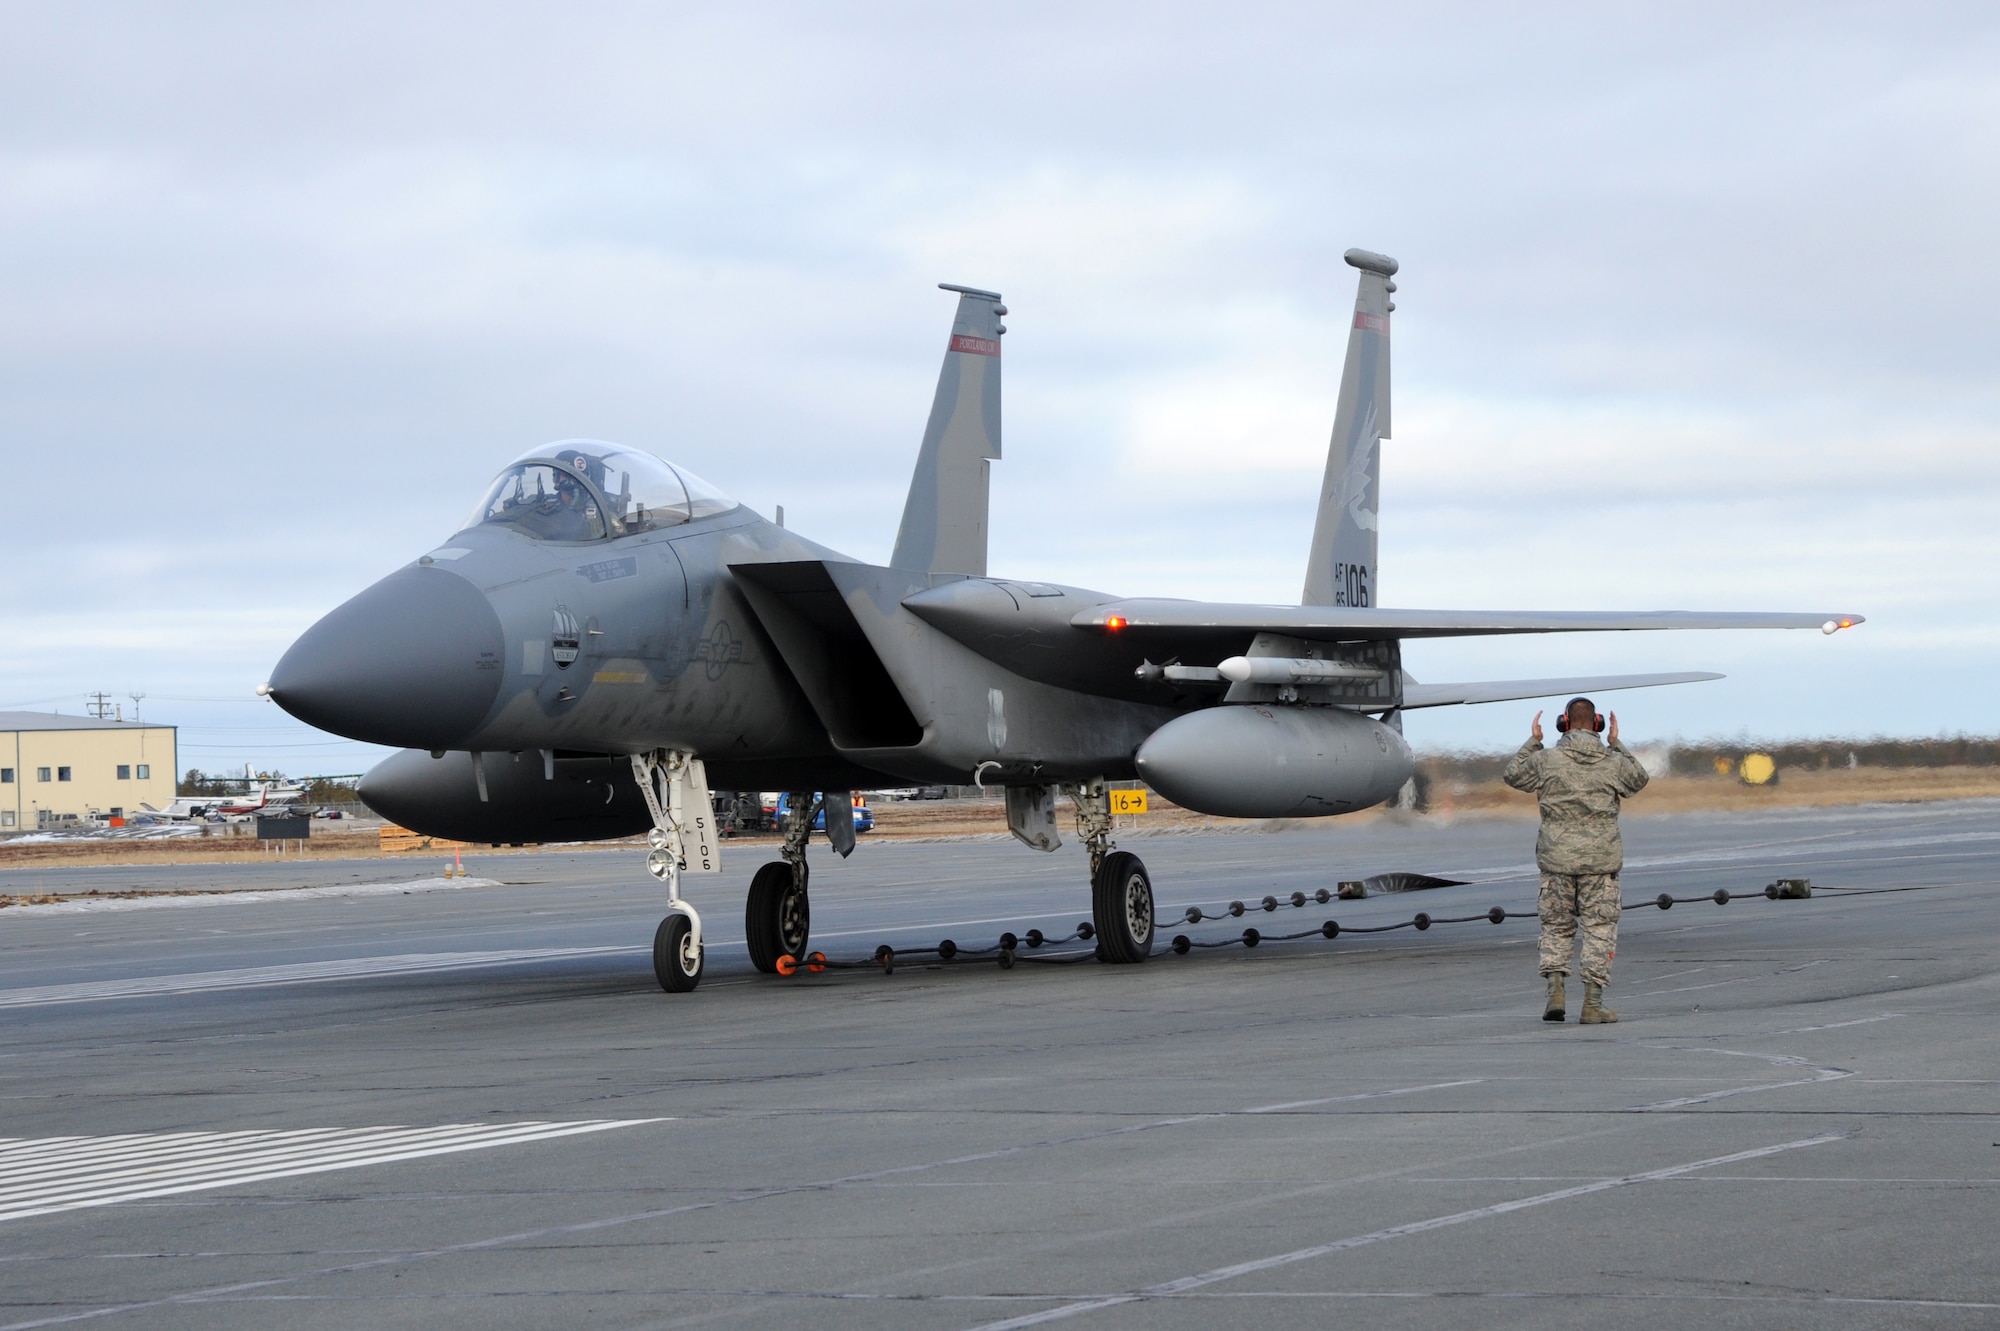 Master Sgt. Dustin Brice, 142nd Maintenance Group, marshals the F-15 Eagle following an aircraft arresting barrier system test at the Yellowknife, Northwest Territories, Airport, Oct. 18, 2016.  The arresting barrier system is used in the event of an emergency where a fighter aircraft cannot stop on its own.  Members of the 142nd Fighter Wing are in Yellowknife to participate in Vigilant Shield 2017. The Vigilant Shield 2017 Field Training Exercise is an annual exercise sponsored by The North American Aerospace Defense Command and led by Alaskan NORAD Region, in conjunction with Canadian NORAD Region and Continental NORAD Region, who undertake field training exercises aimed at improving operational capability in a bi-national environment.   (U.S. Air National Guard photo by Senior Master Sgt. Shelly Davison, 142nd Fighter Wing Public Affairs)